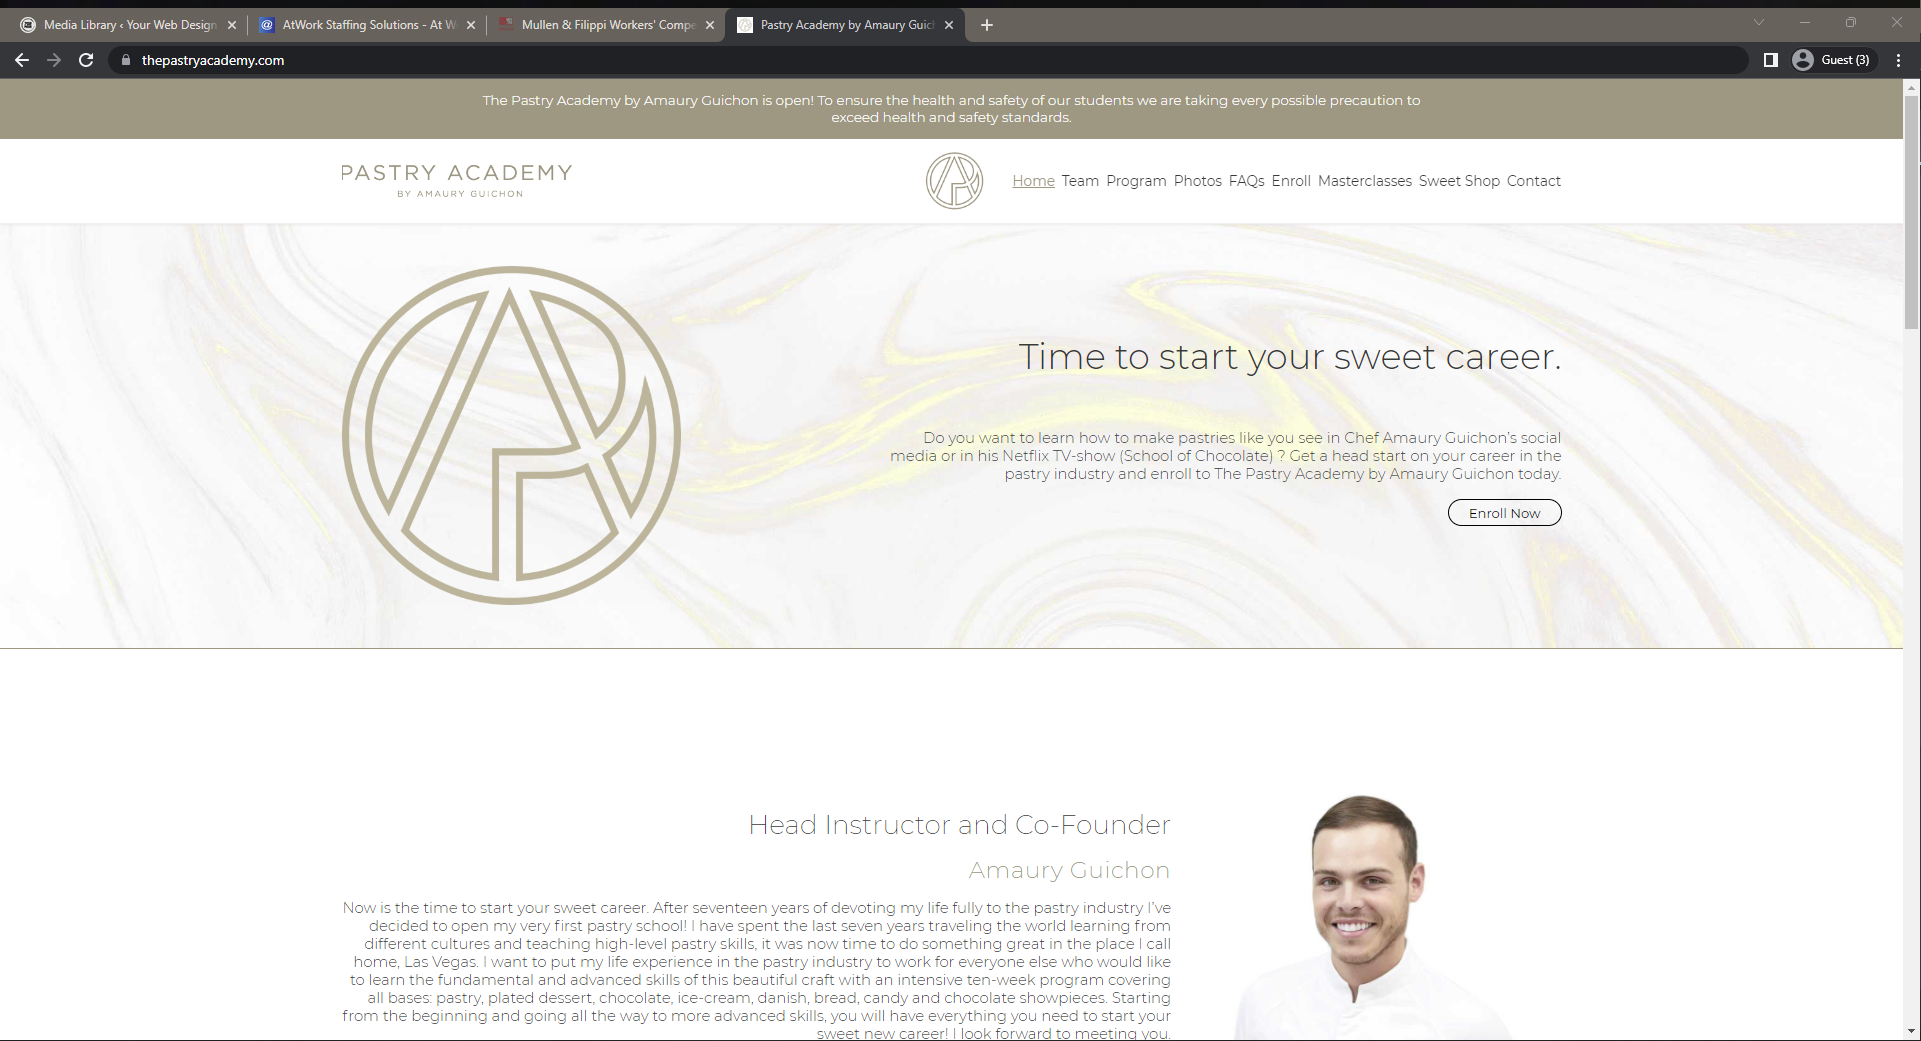 The Pastry Academy Website Design by 702 Pros - Social Media Marketing Lewisville, TX